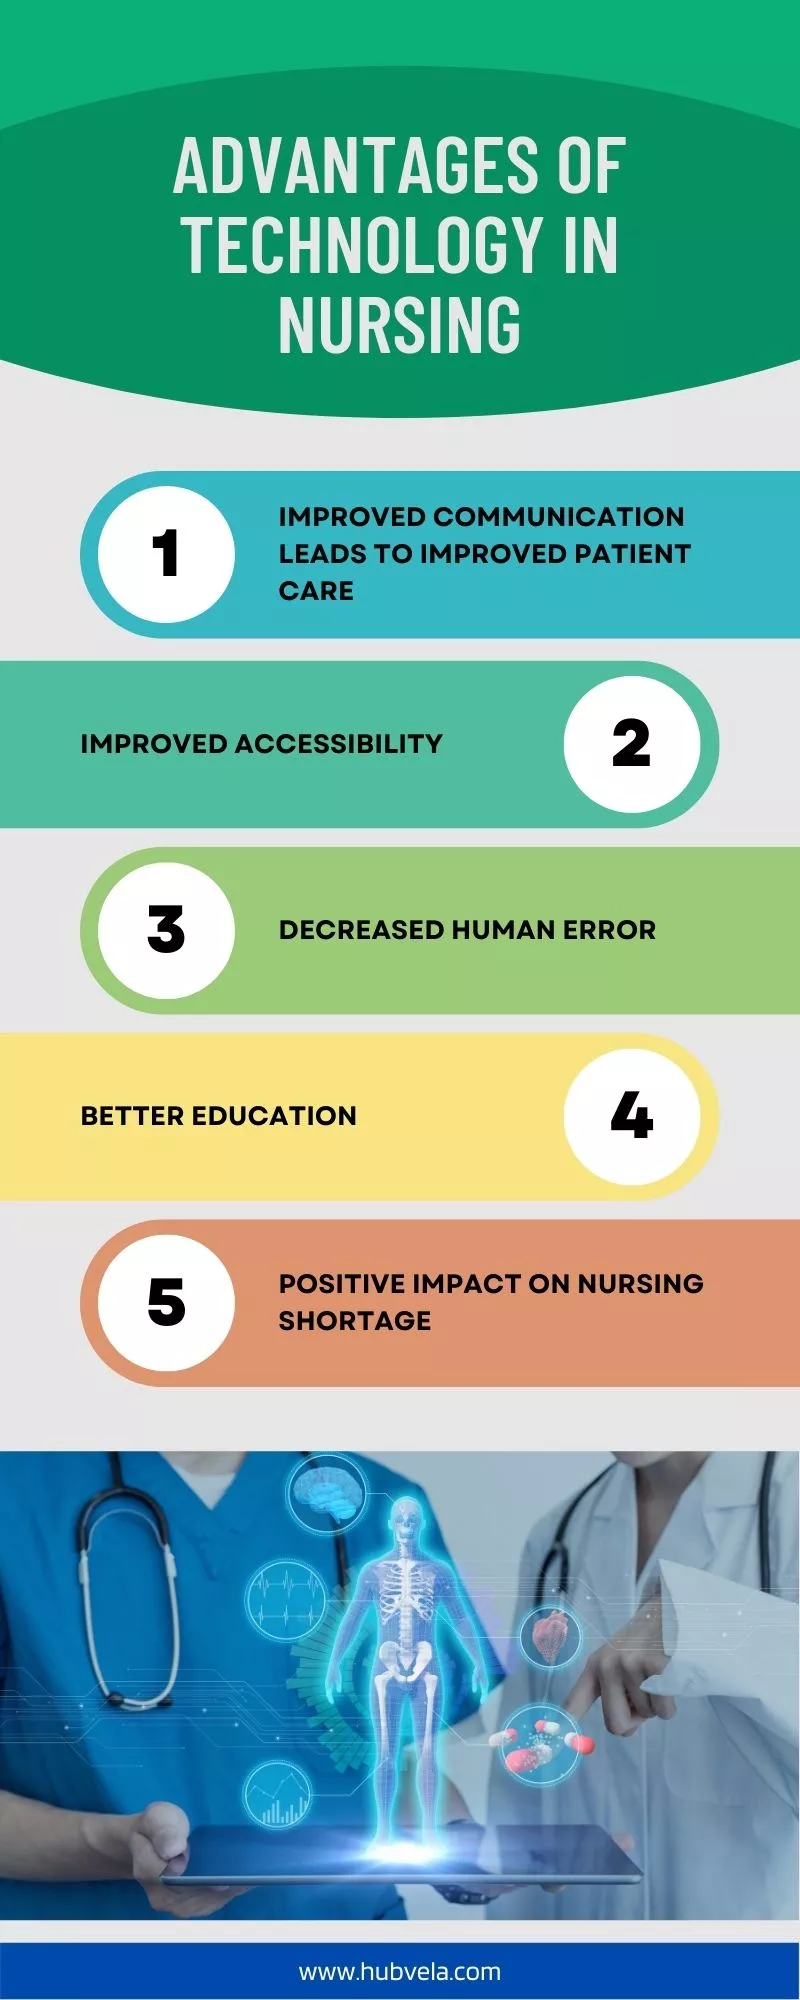 Advantages of Technology in Nursing Infographic